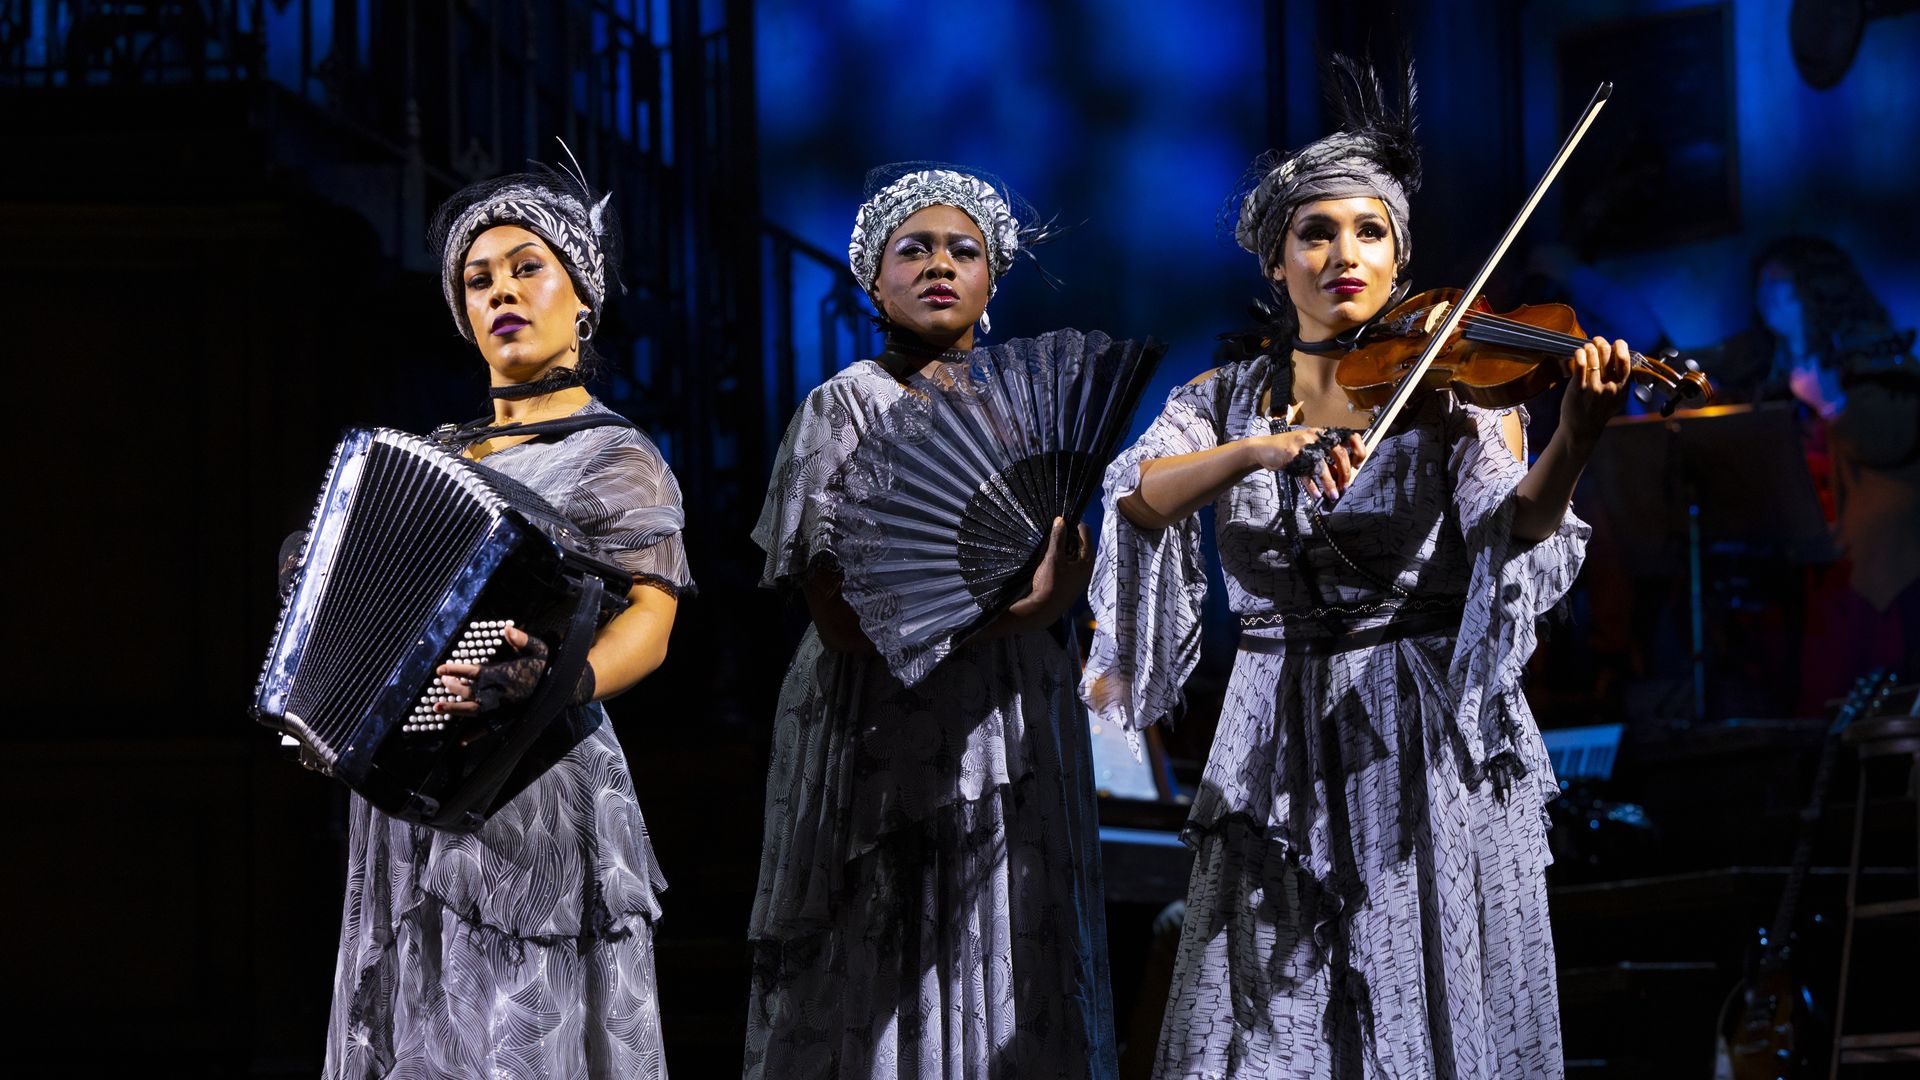 Three actresses in purple dresses play instruments and pose on stage in the musical Hadestown.